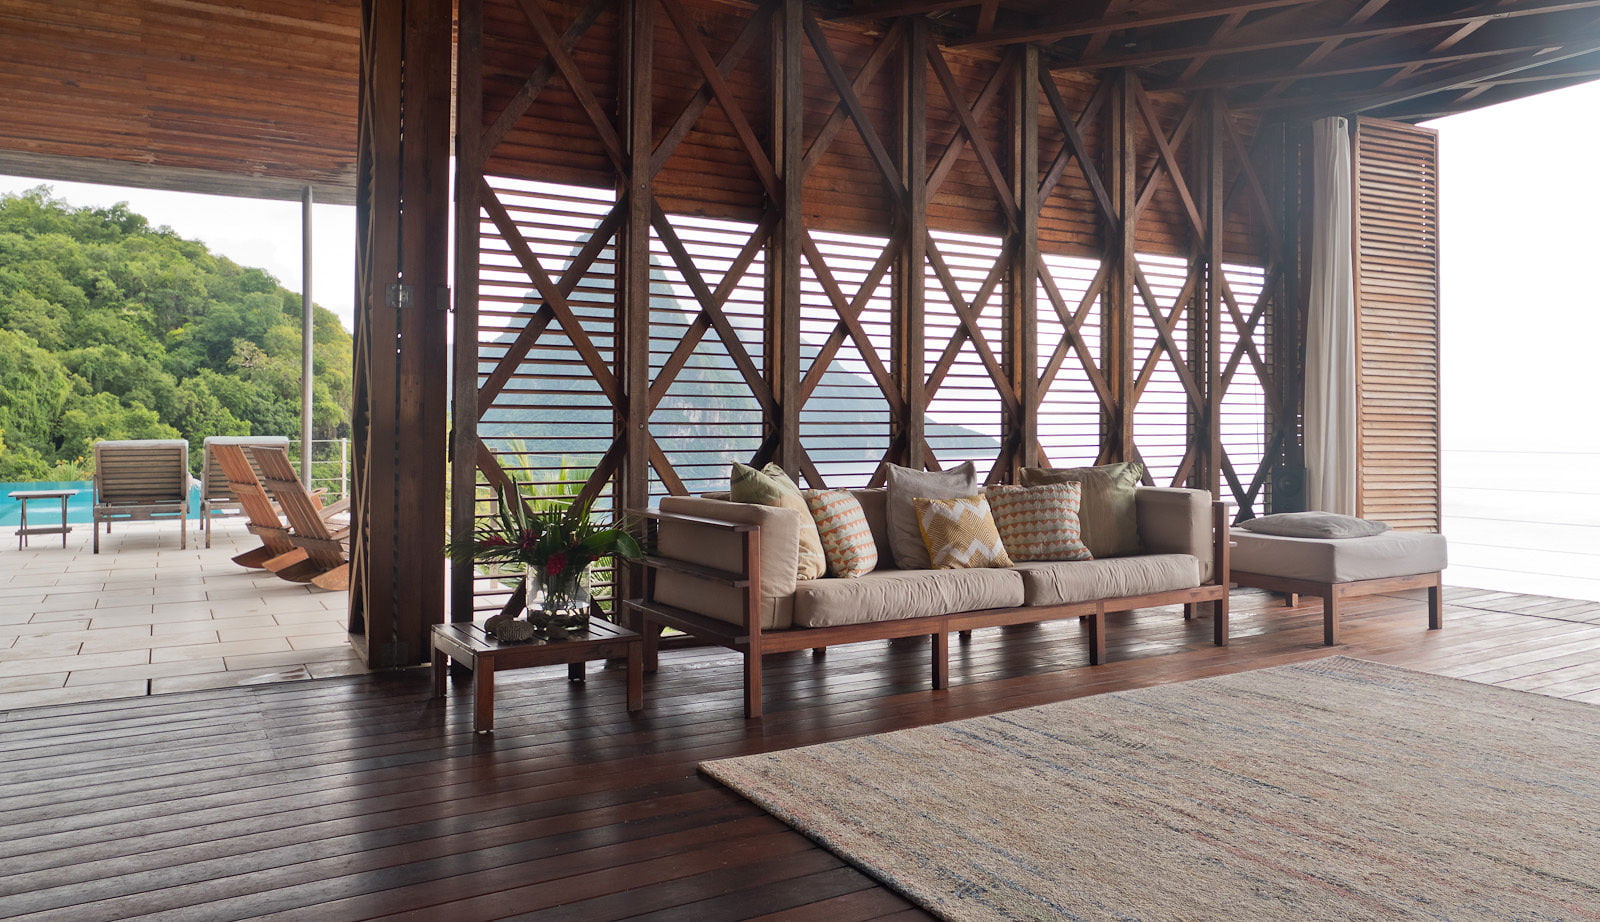 A view of the living space at Cosmos St Lucia, showing sofa seating, teak screens with concertina doors, and a sun terrace featuring sun loungers next to the pool. Rainforest hillside and the Pitons are visible beyond.